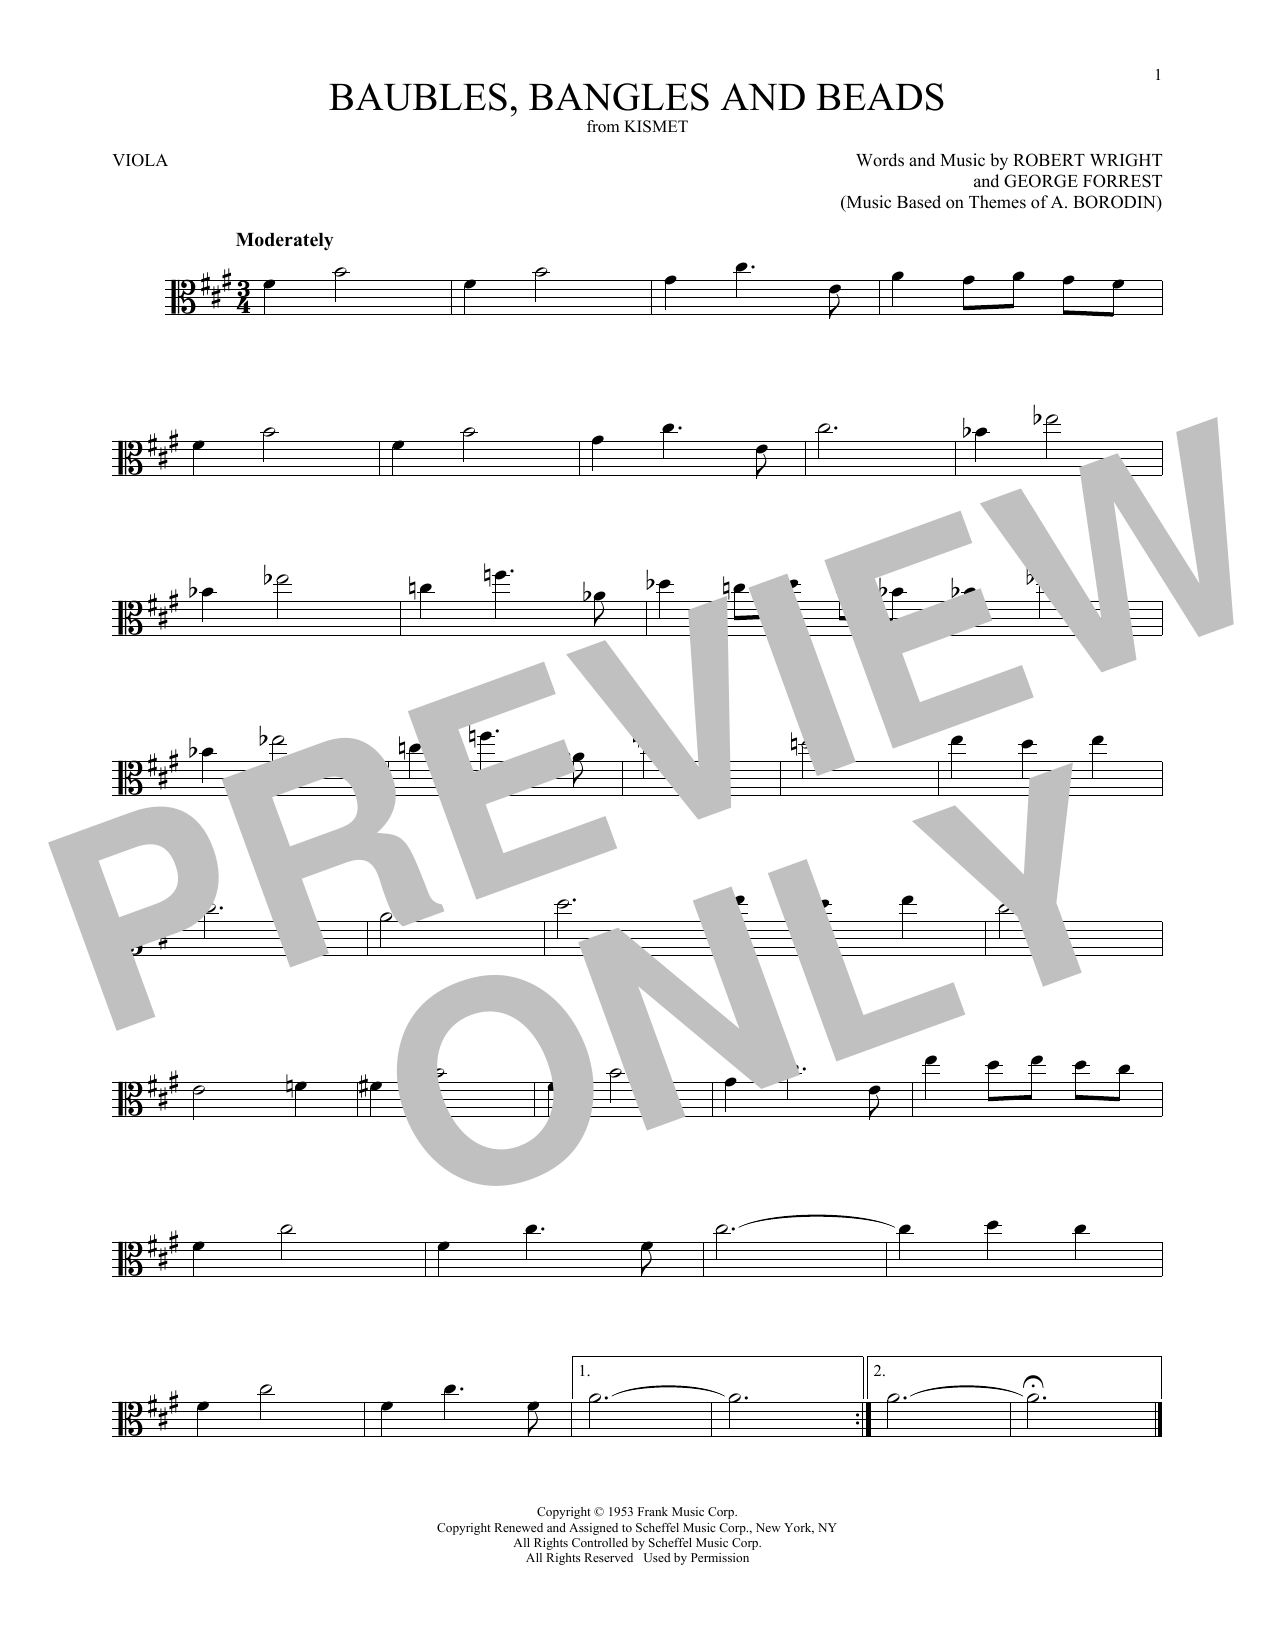 Download George Forrest Baubles, Bangles And Beads Sheet Music